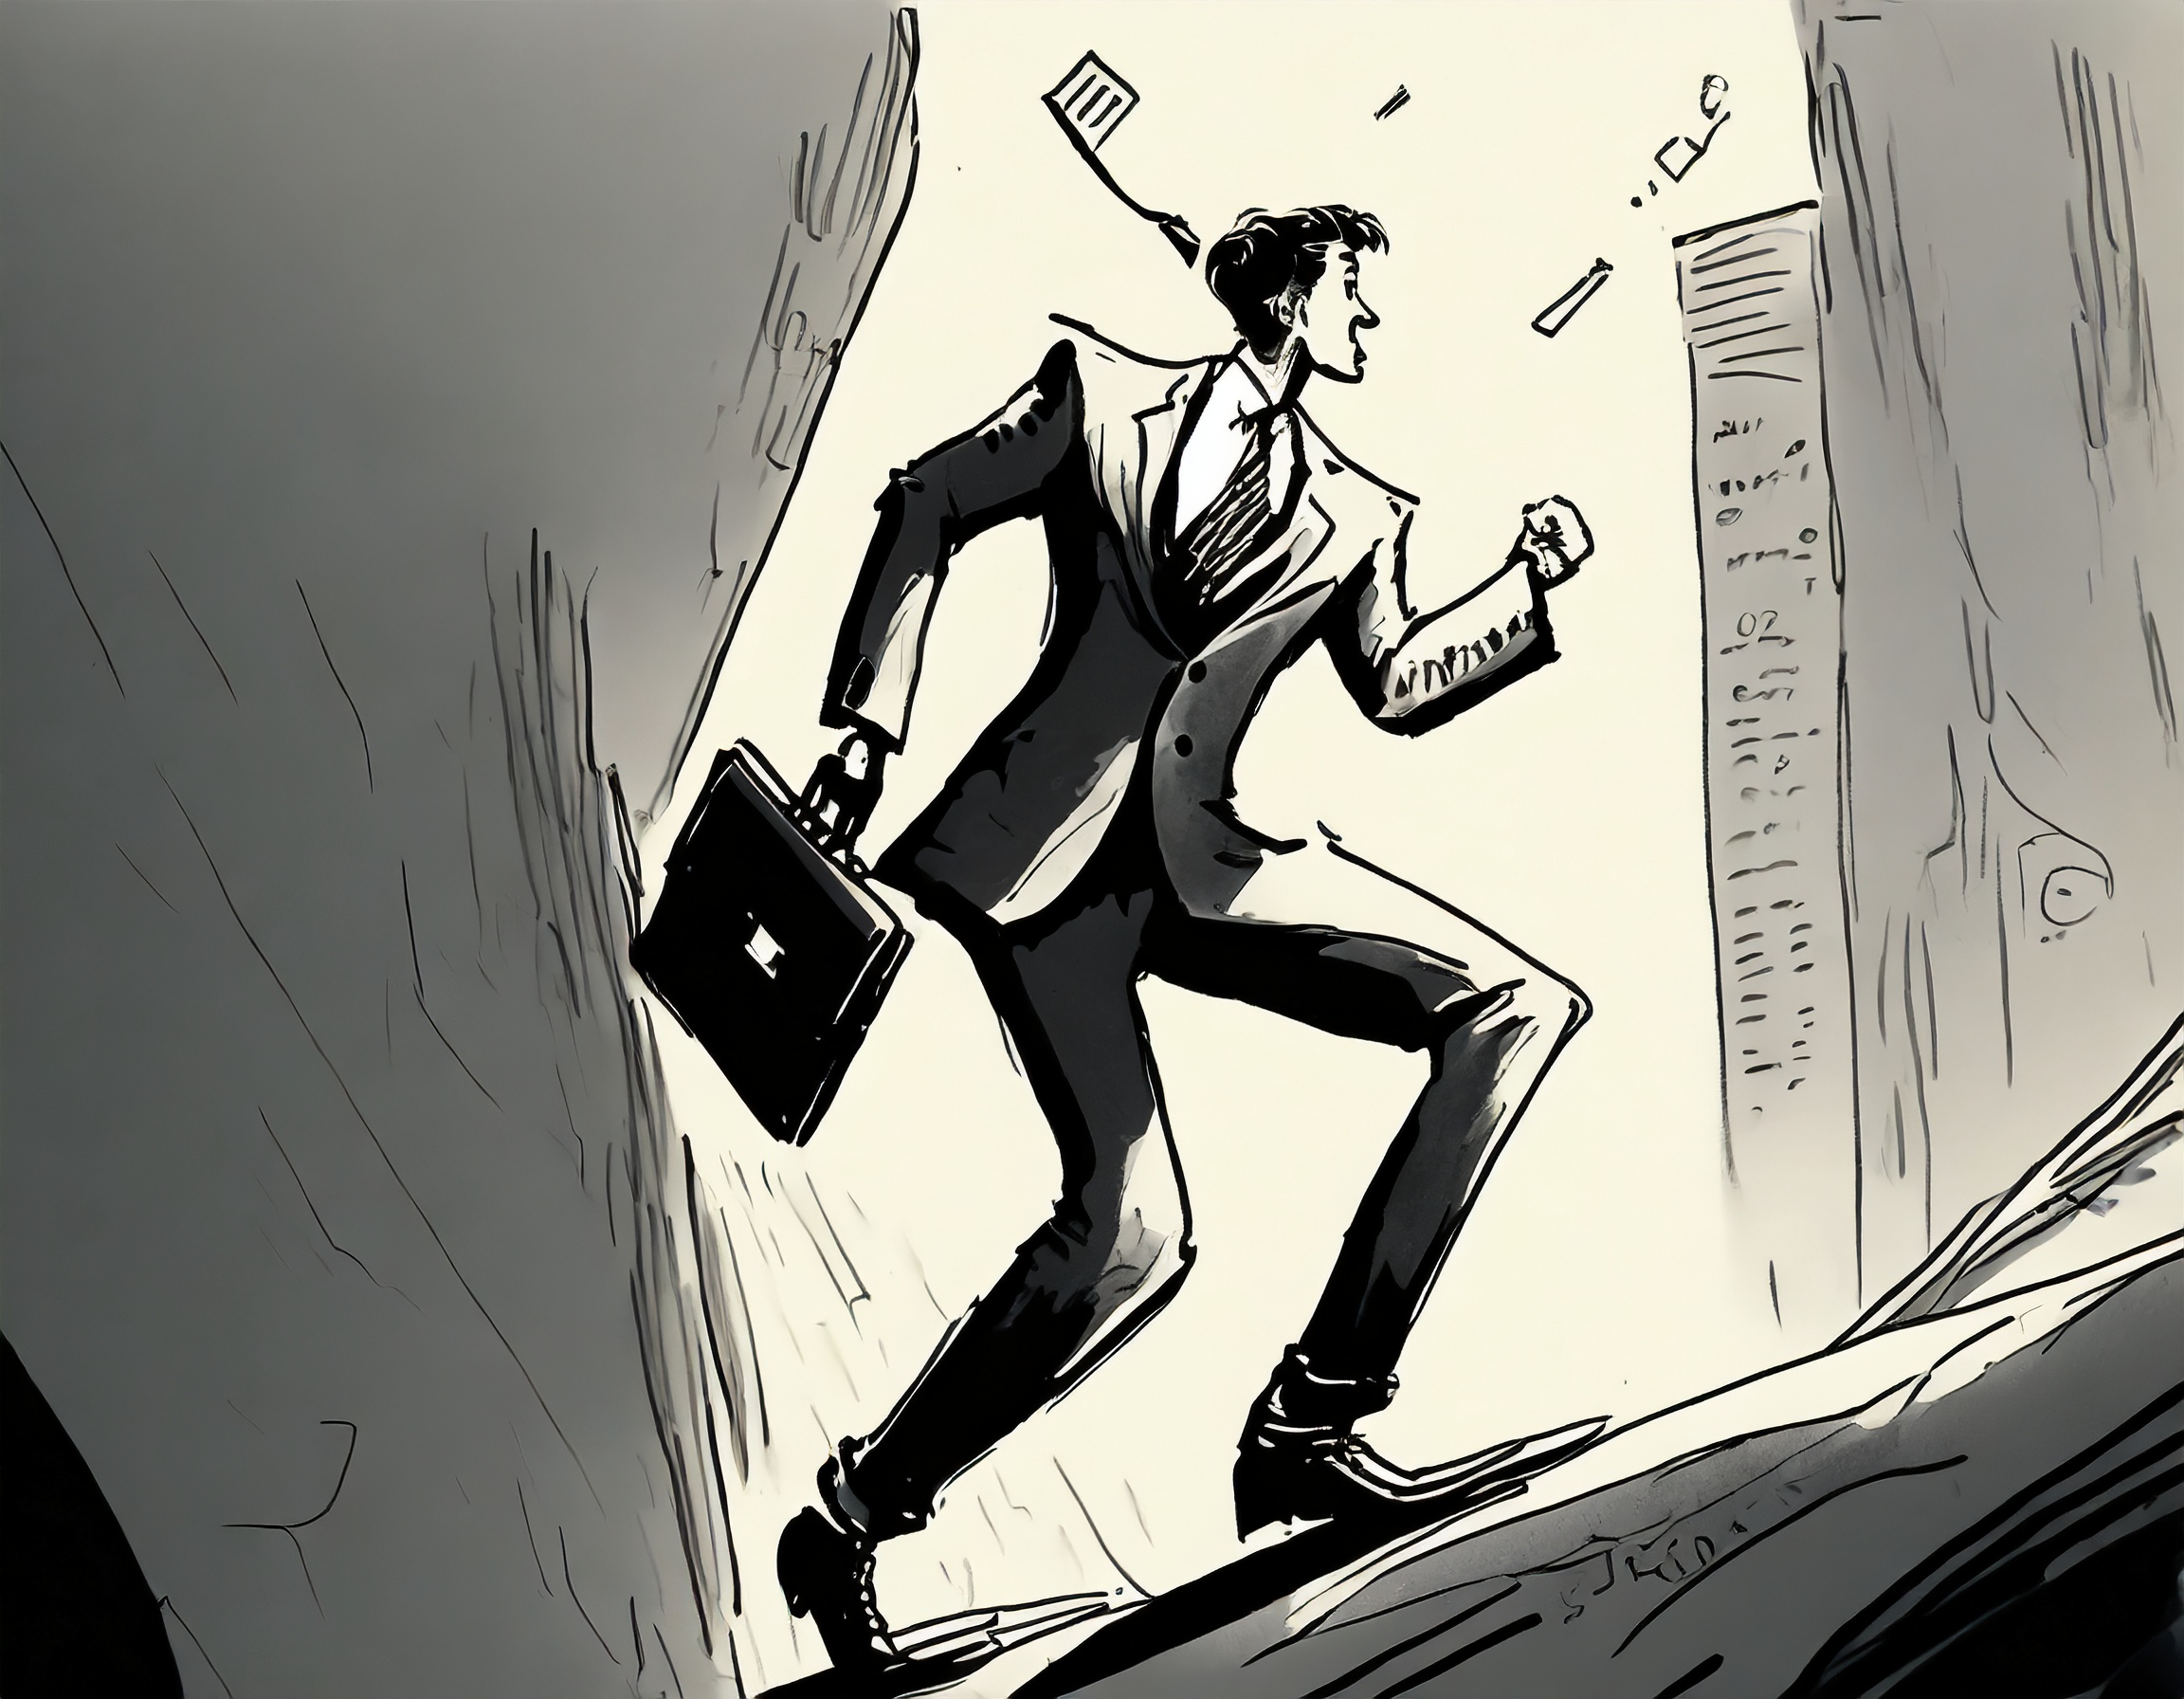 A stylized black and white illustration showing a person in business attire running with a sense of urgency. The figure is depicted mid-stride, with their briefcase swinging in motion and their tie flapping behind them. The background has an abstract design that conveys a sense of rapid movement or possibly wind. The person appears focused and determined, possibly racing against time or heading towards an important event. The artwork has a dynamic, almost comic book-like quality to it